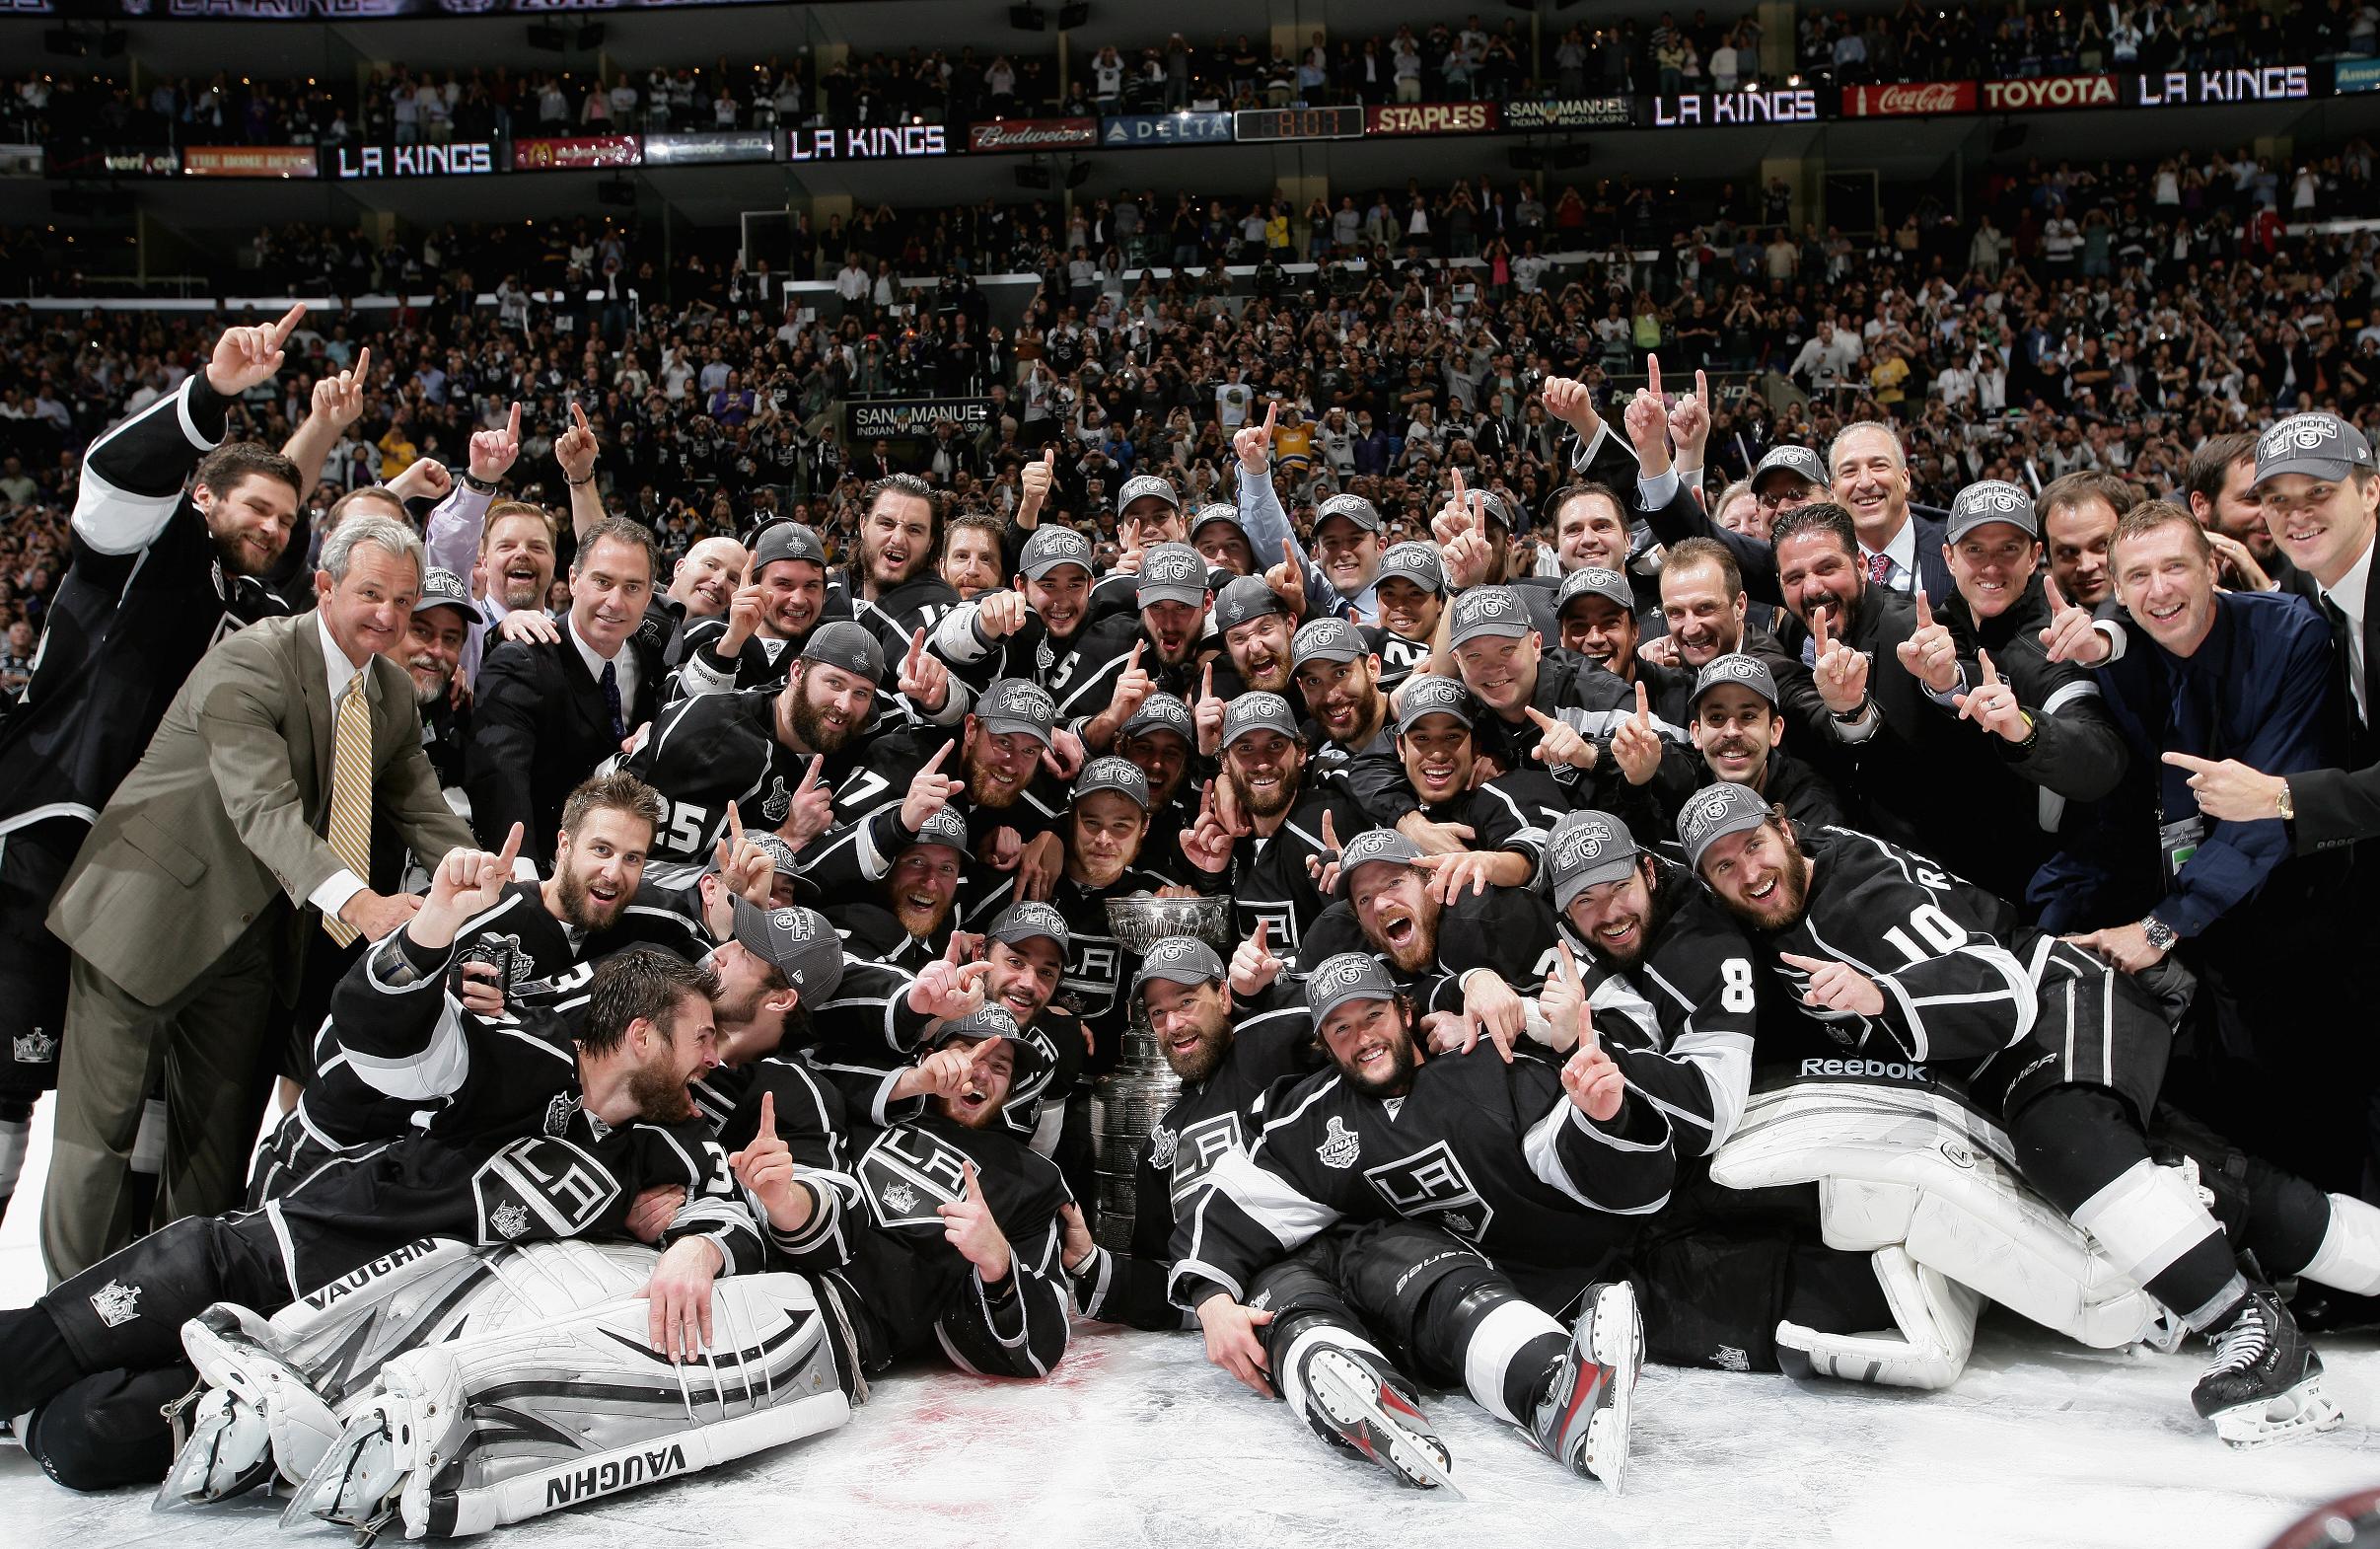 Dustin Brown with the Stanley Cup Trophy after Winning Game 6 of the 2012  Stanley Cup Finals Sports Photo